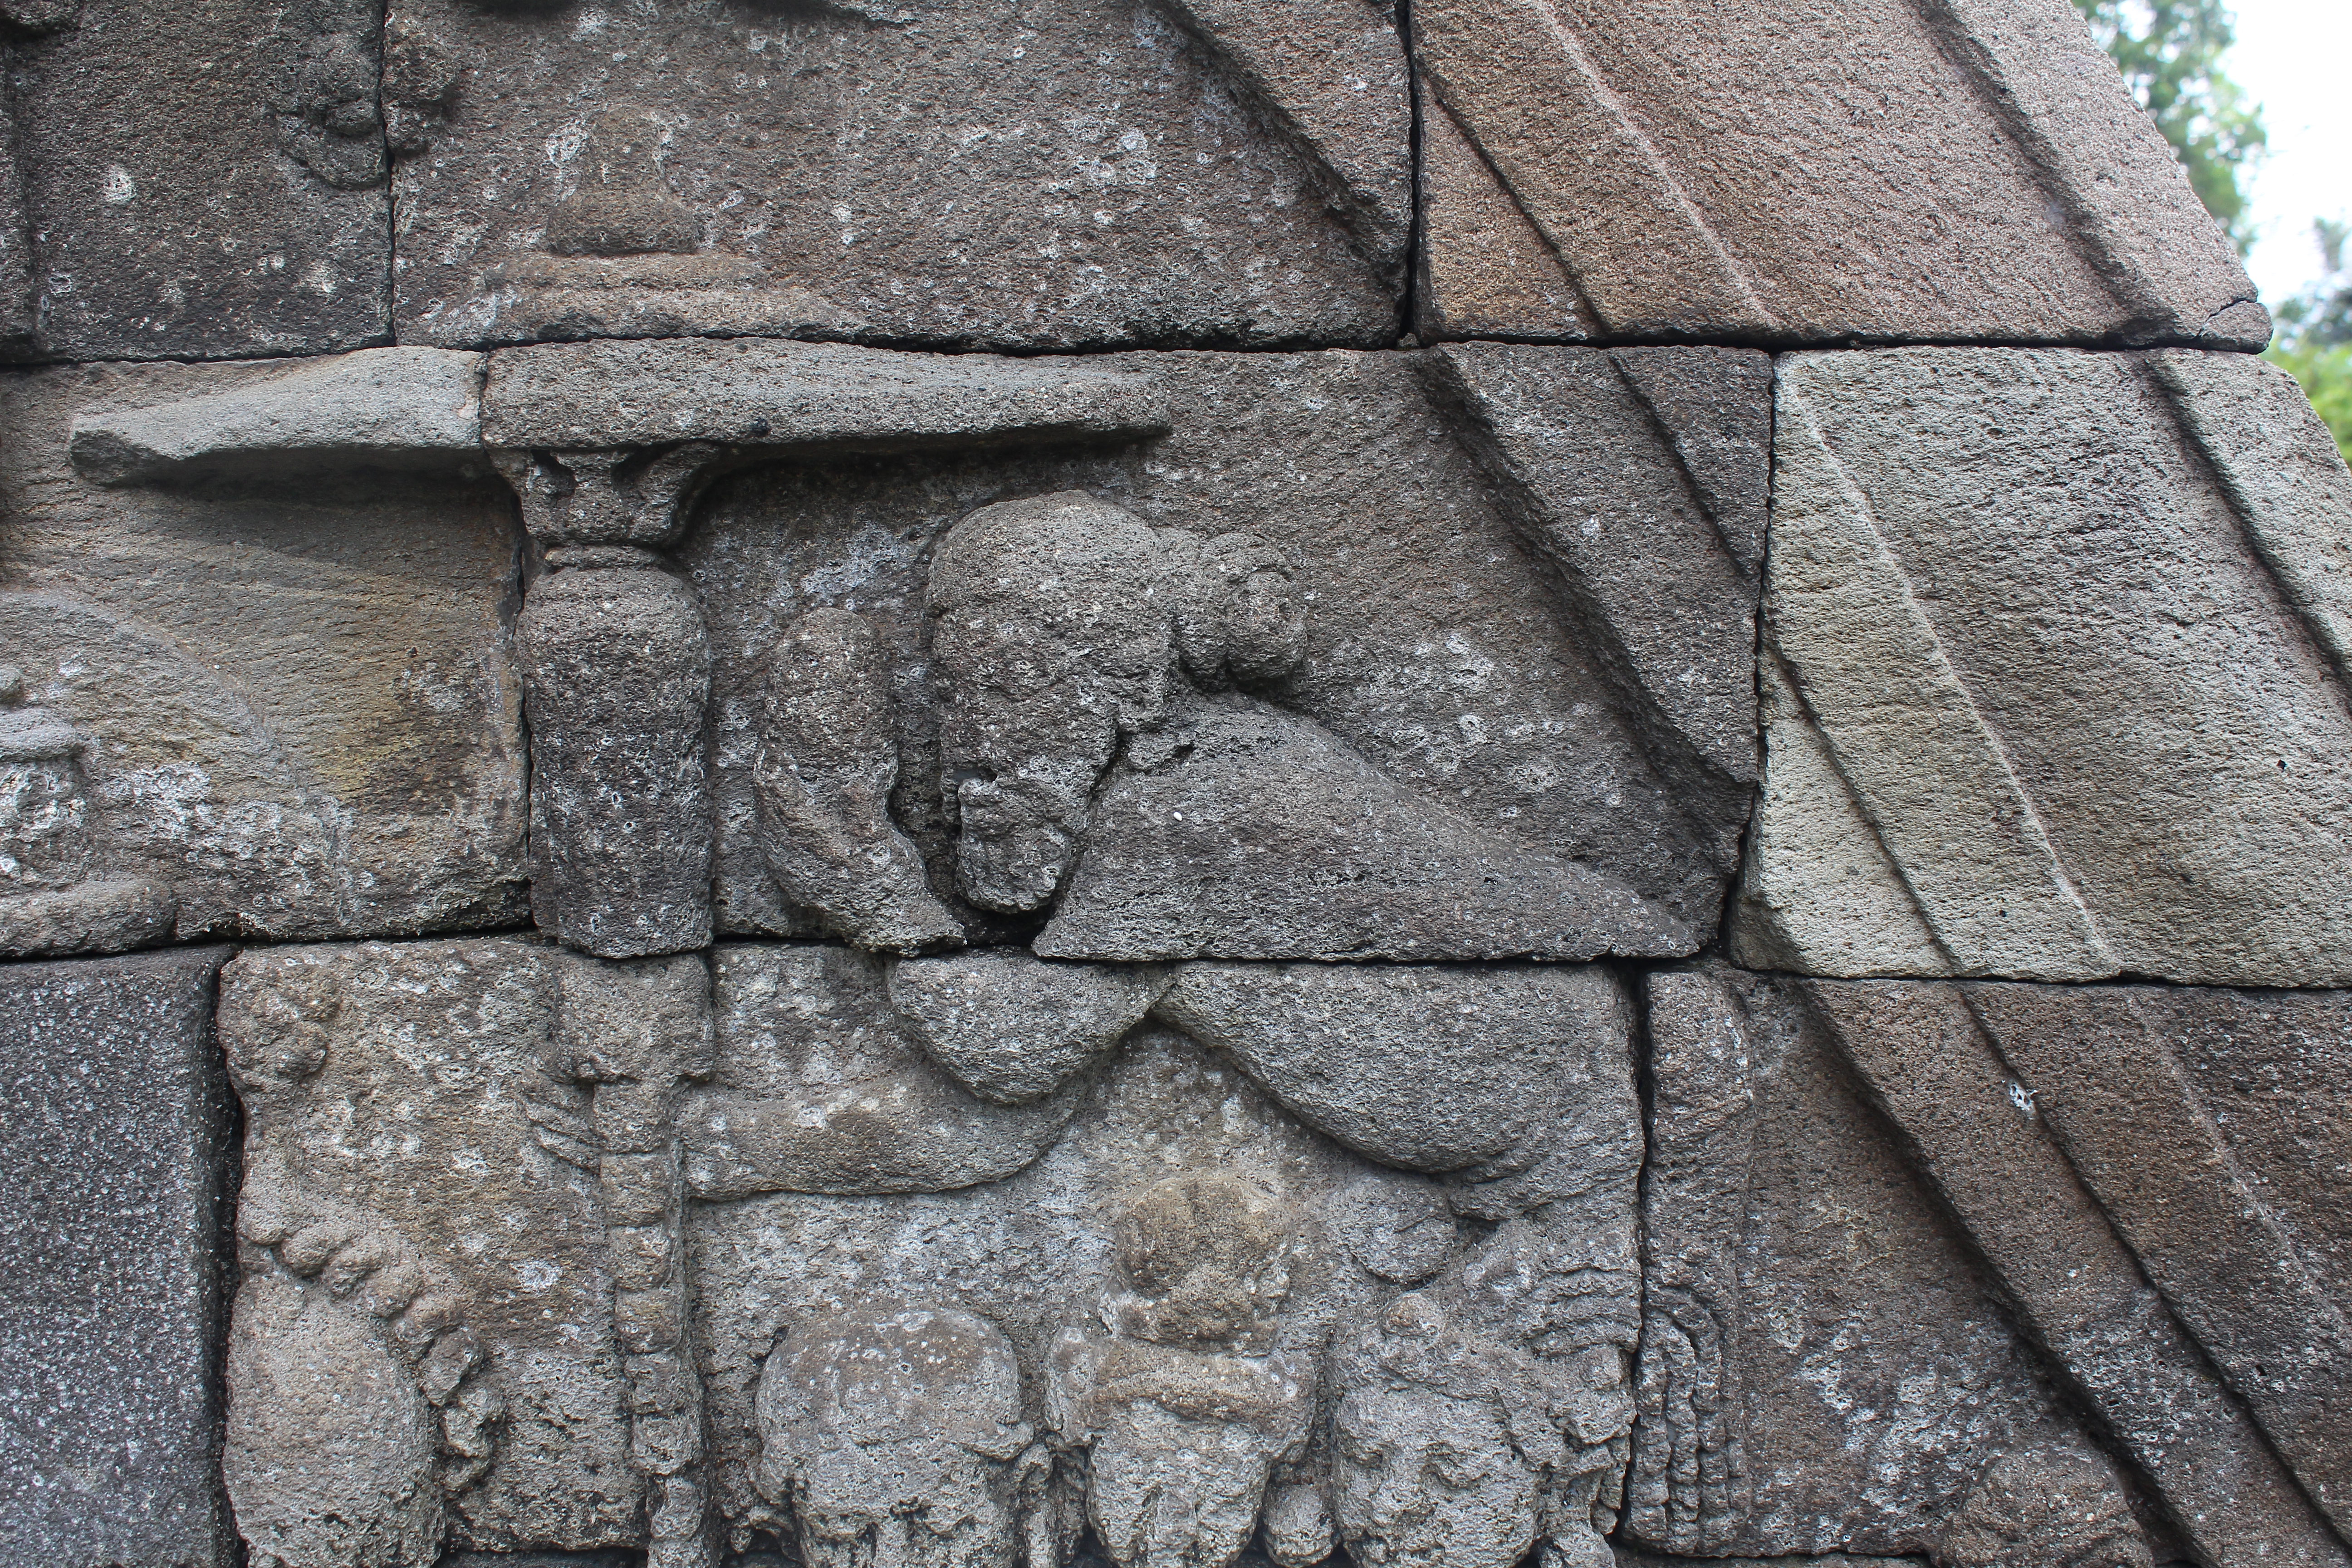 Relief carving showing a man bowing towards a parasol